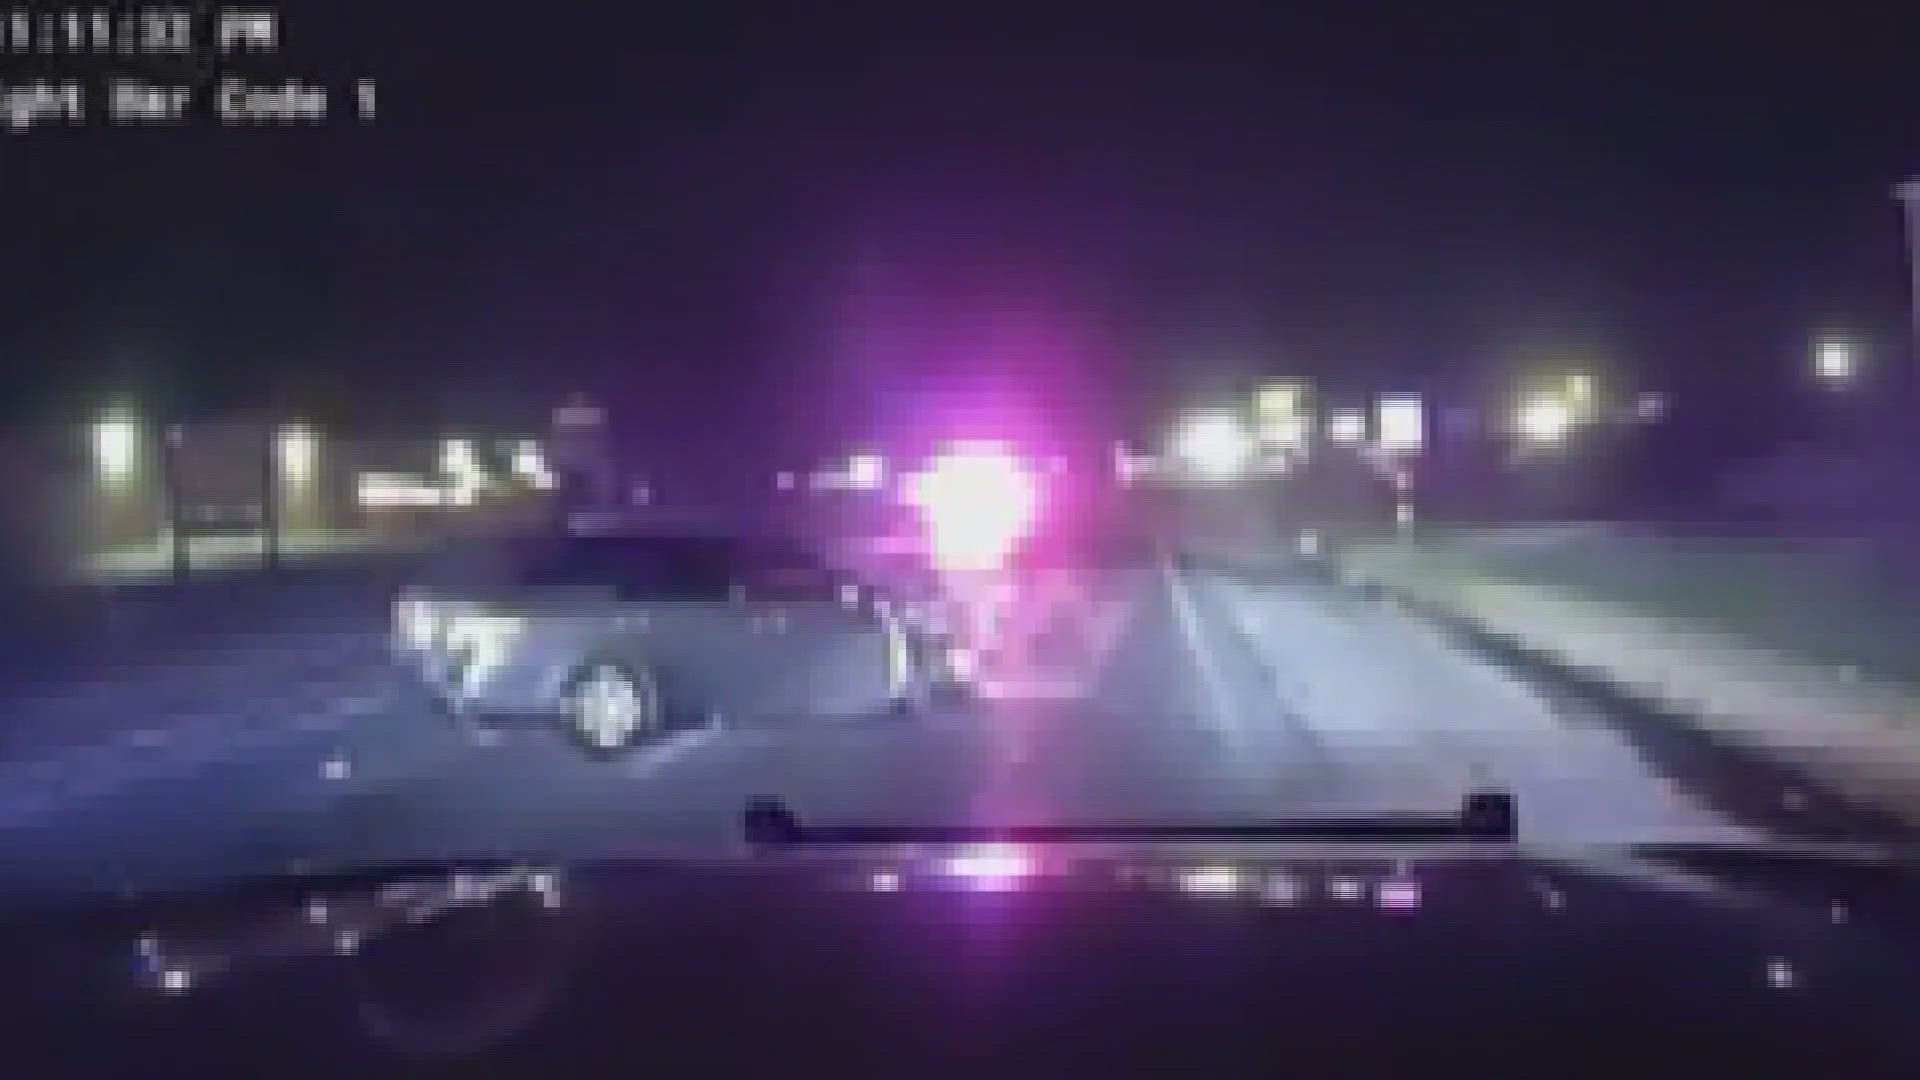 Dashcam video from Sansom Park Police shows a car being struck by a police vehicle that had its emergency lights on.